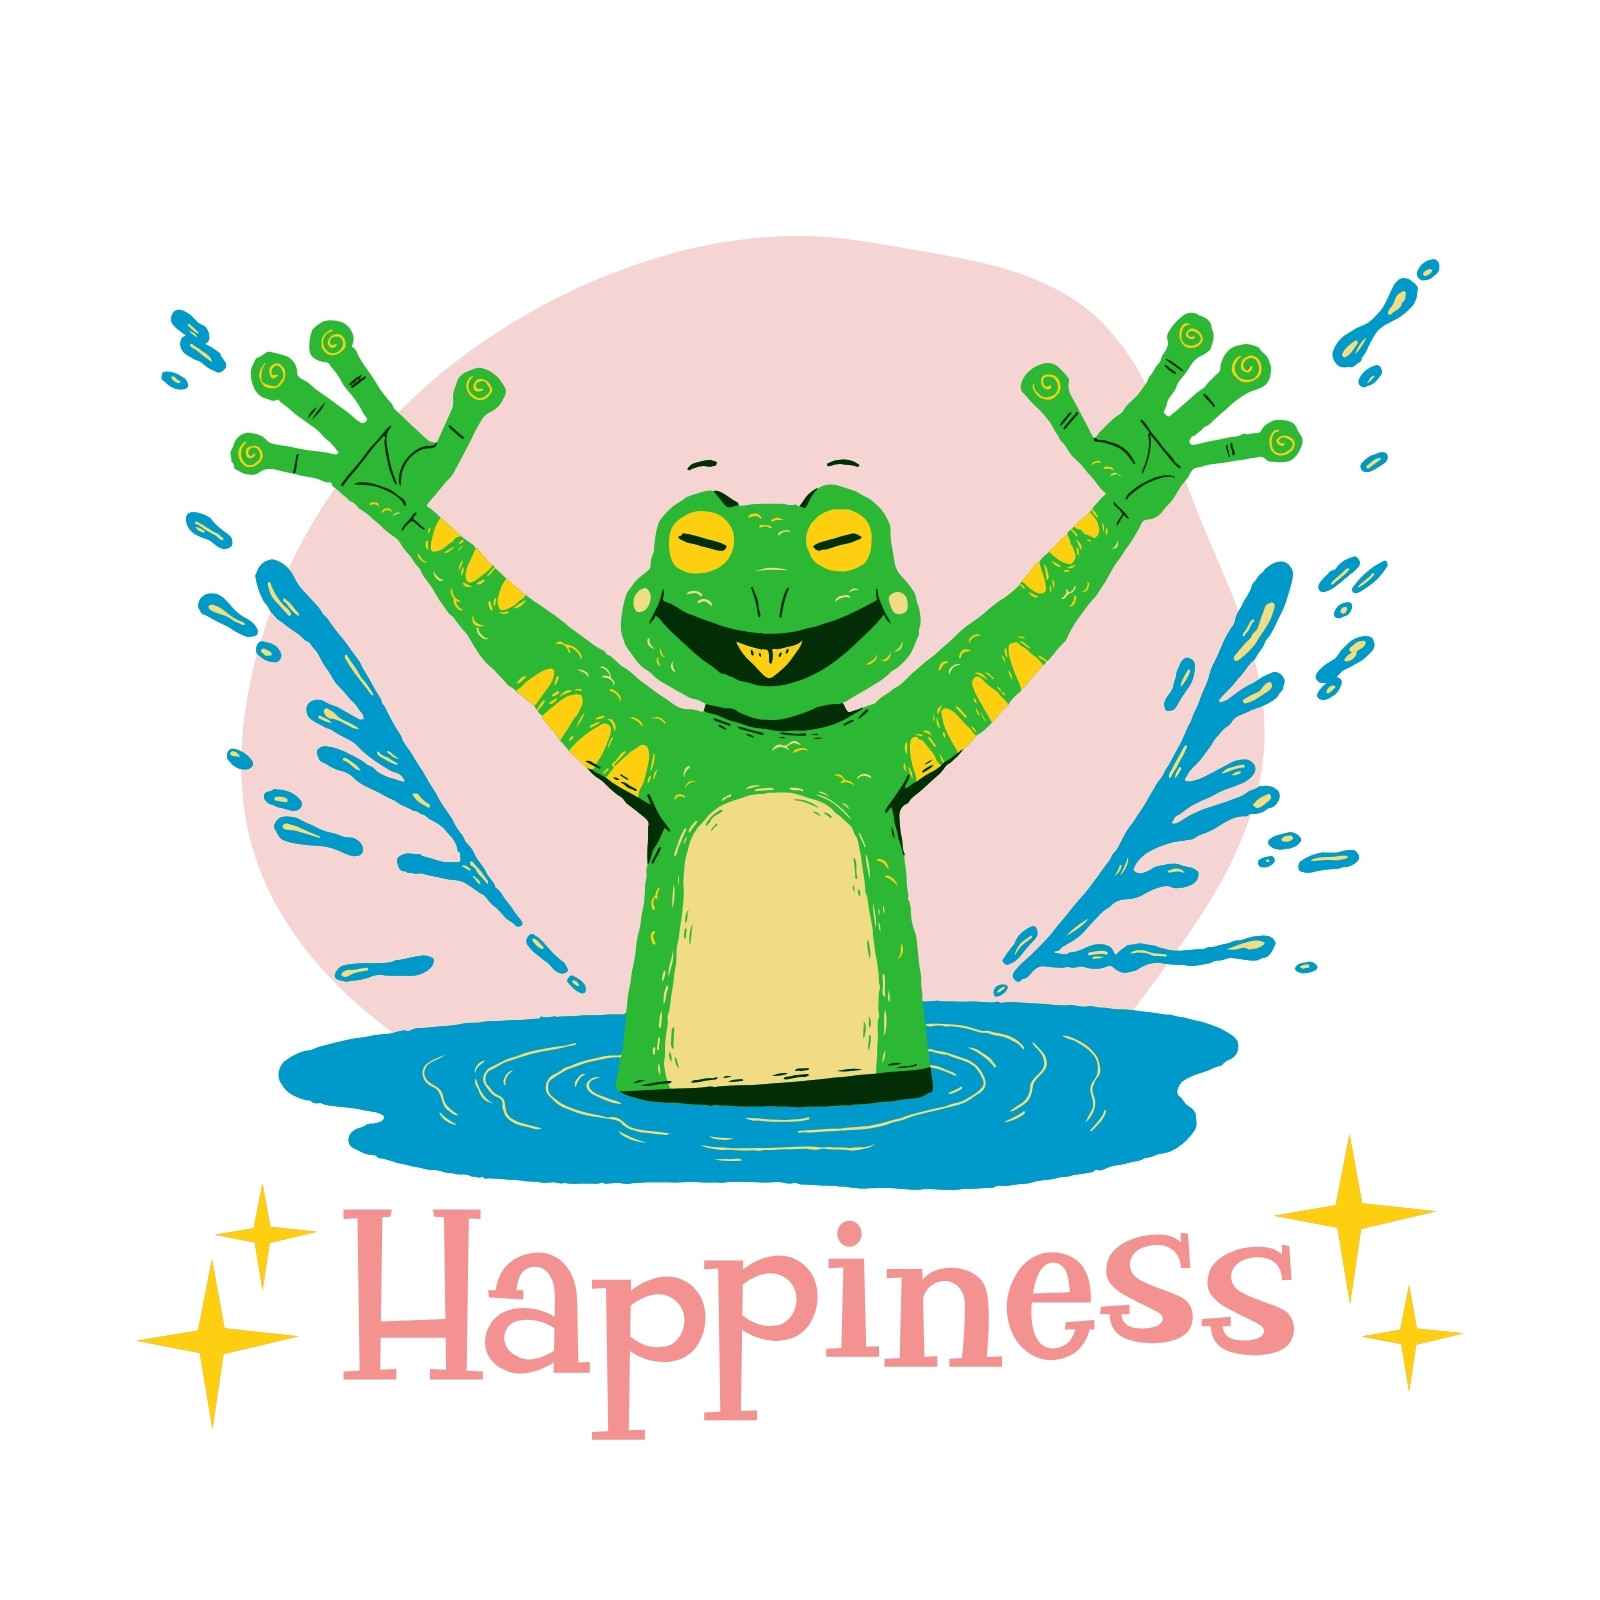 Page 2 - Free and customizable frog wallpaper templates